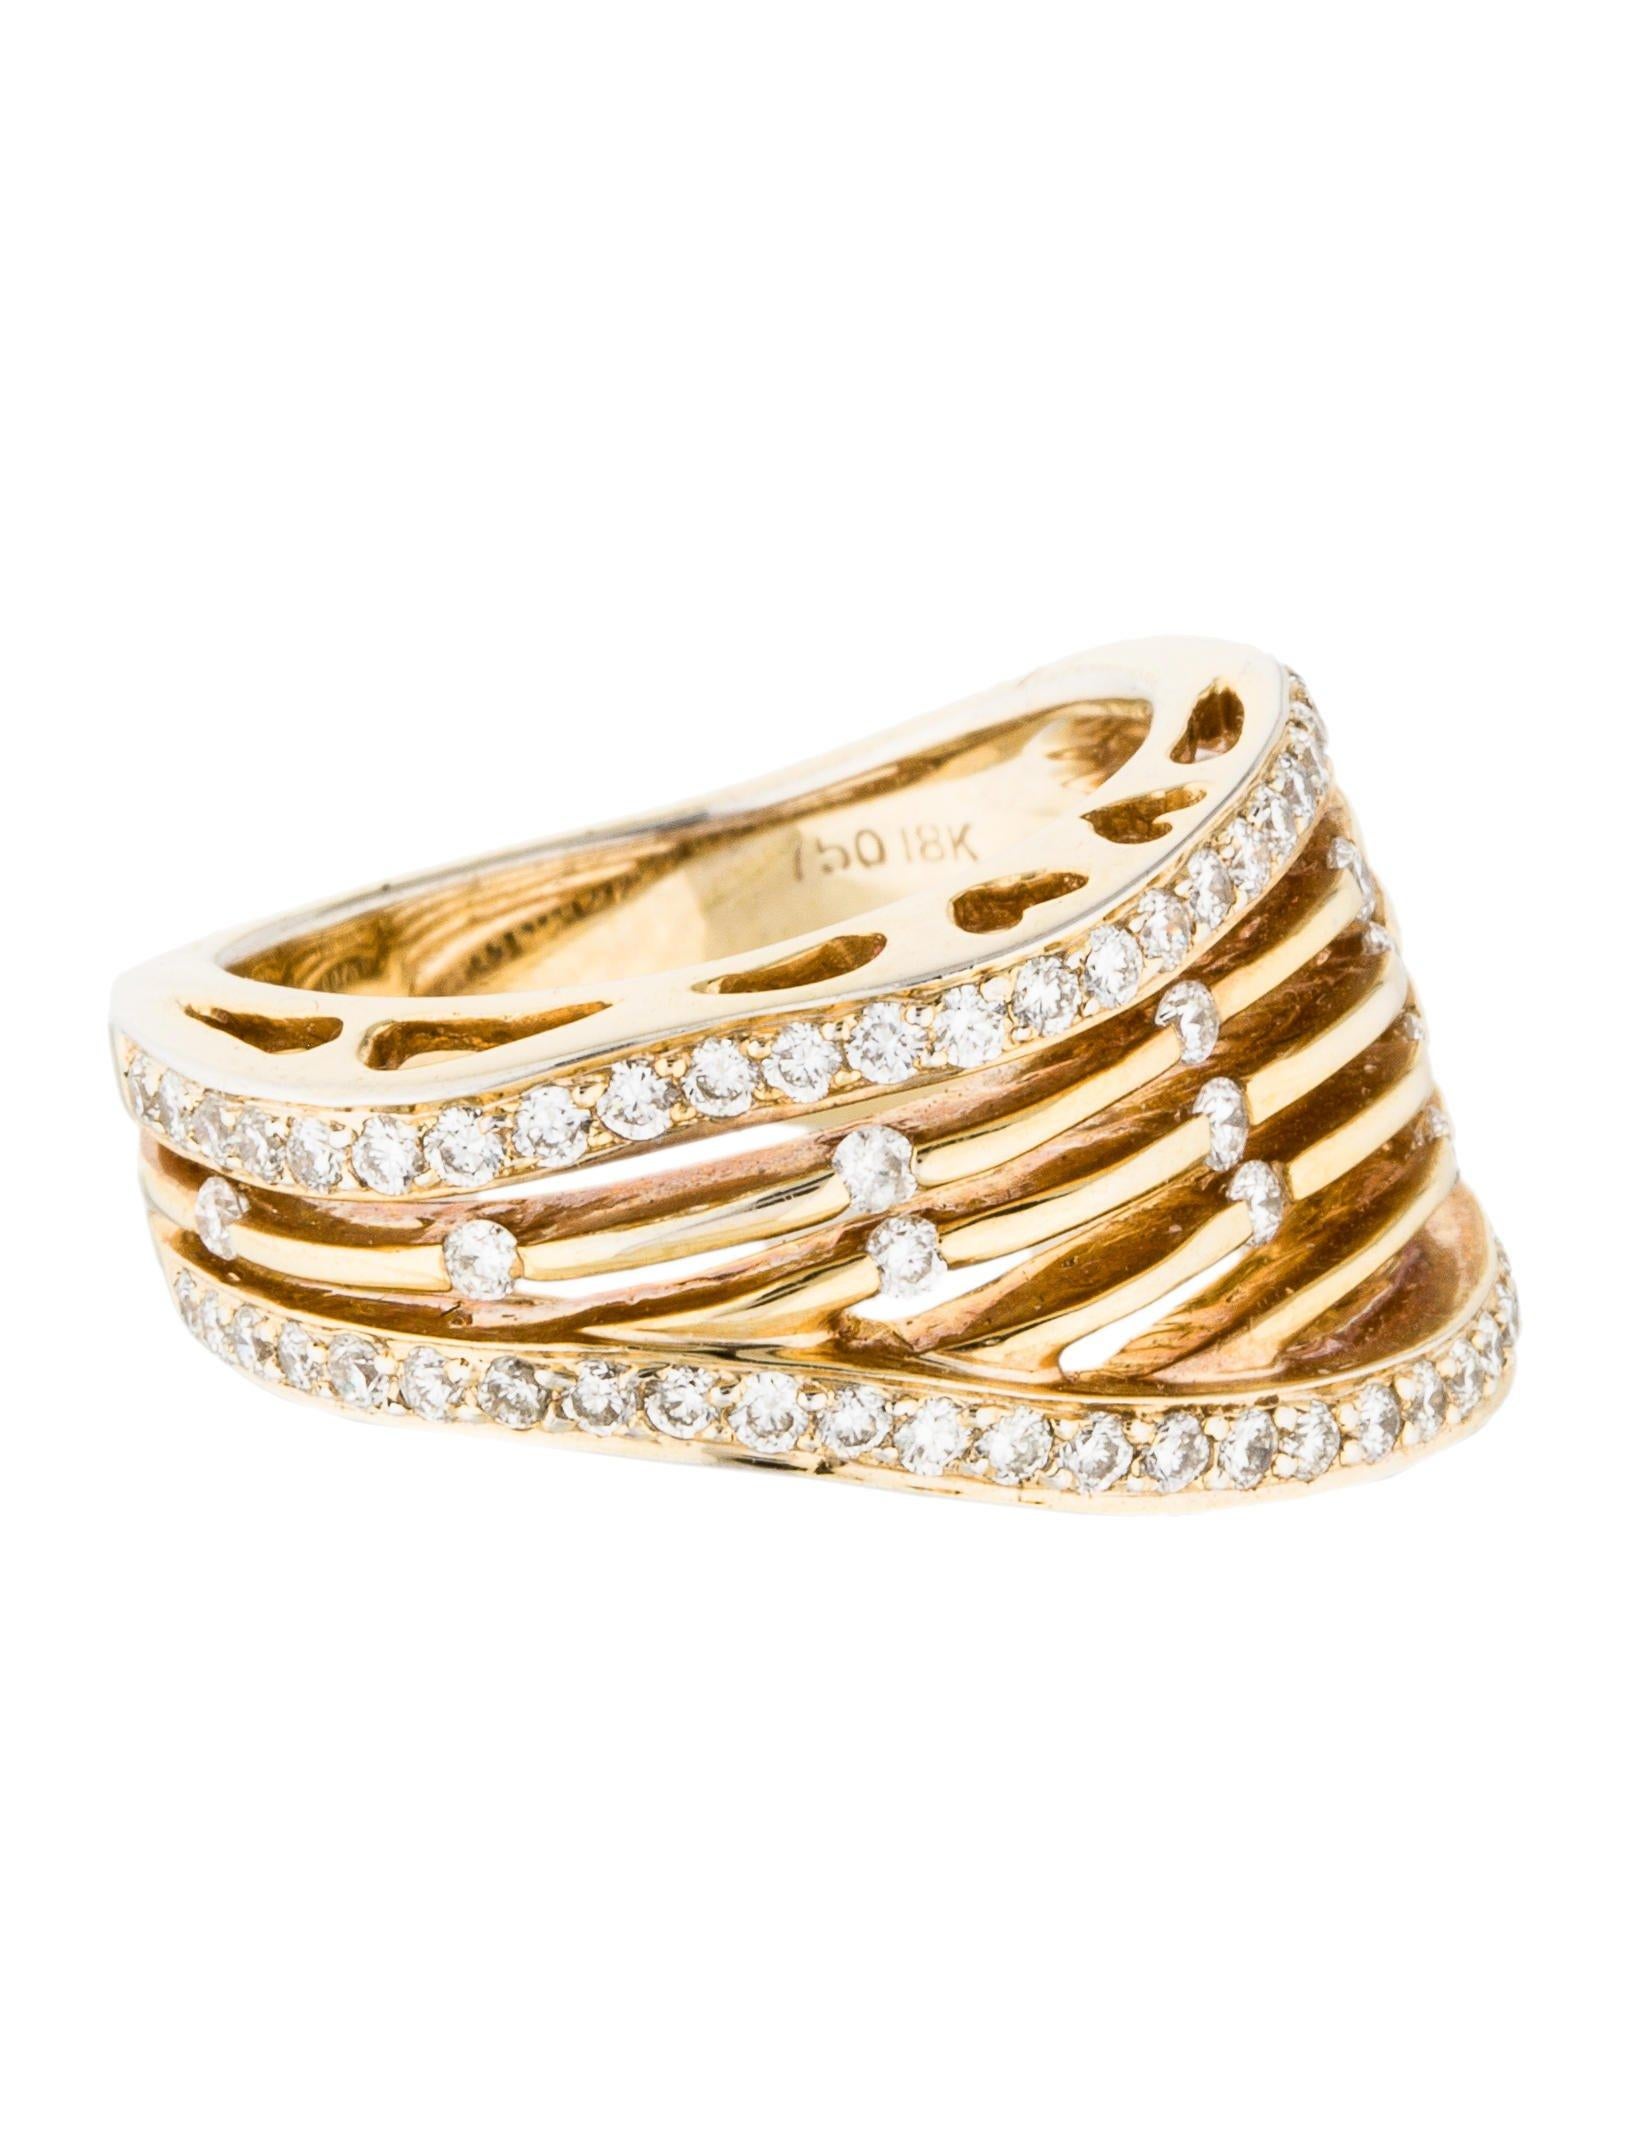 18 Karat Yellow Gold Openwork Diamond Ring 0.58 Carat In New Condition For Sale In New York, NY